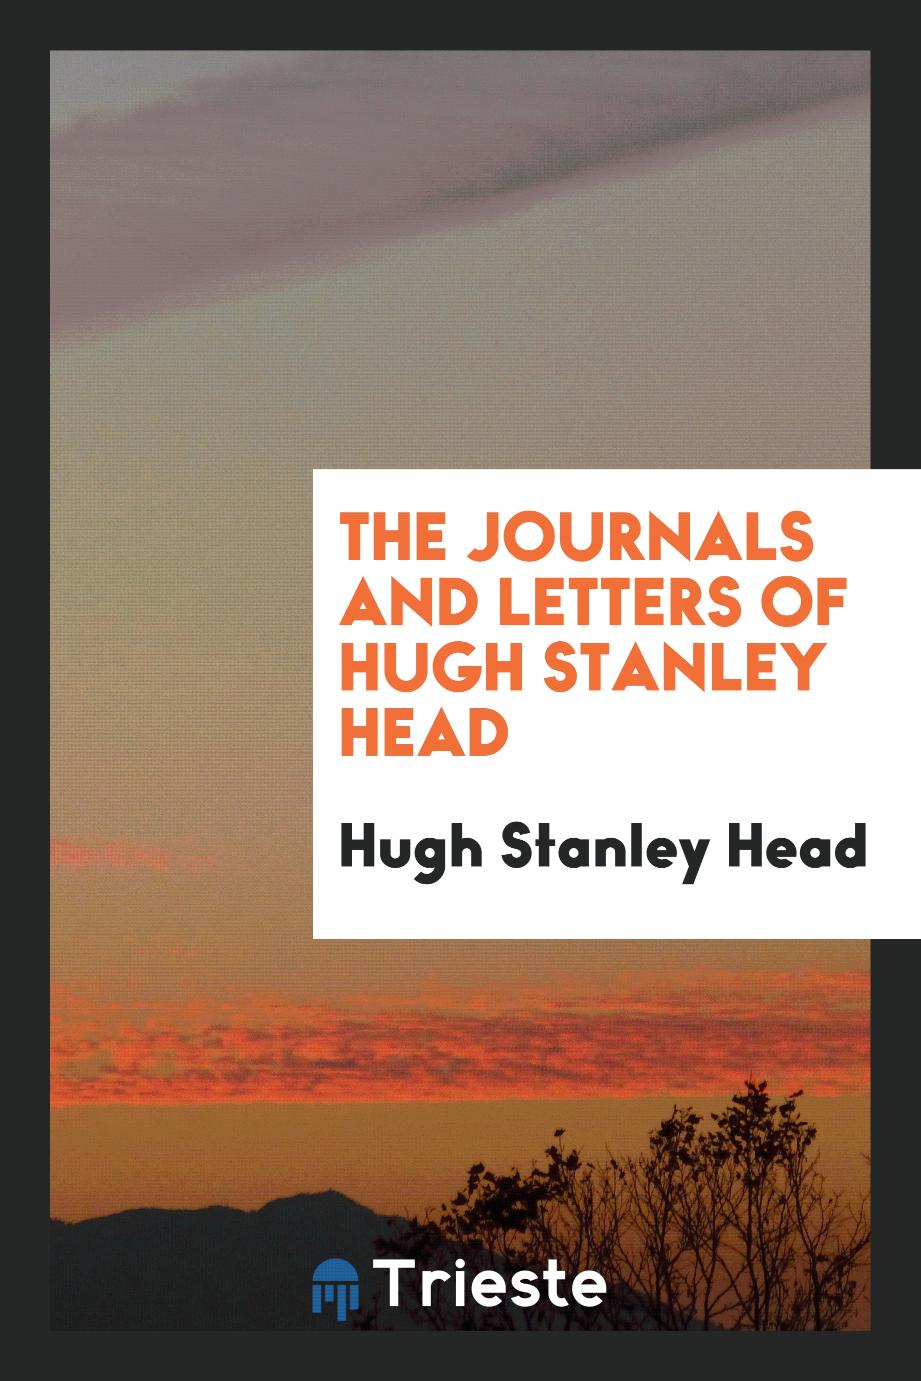 The journals and letters of Hugh Stanley Head